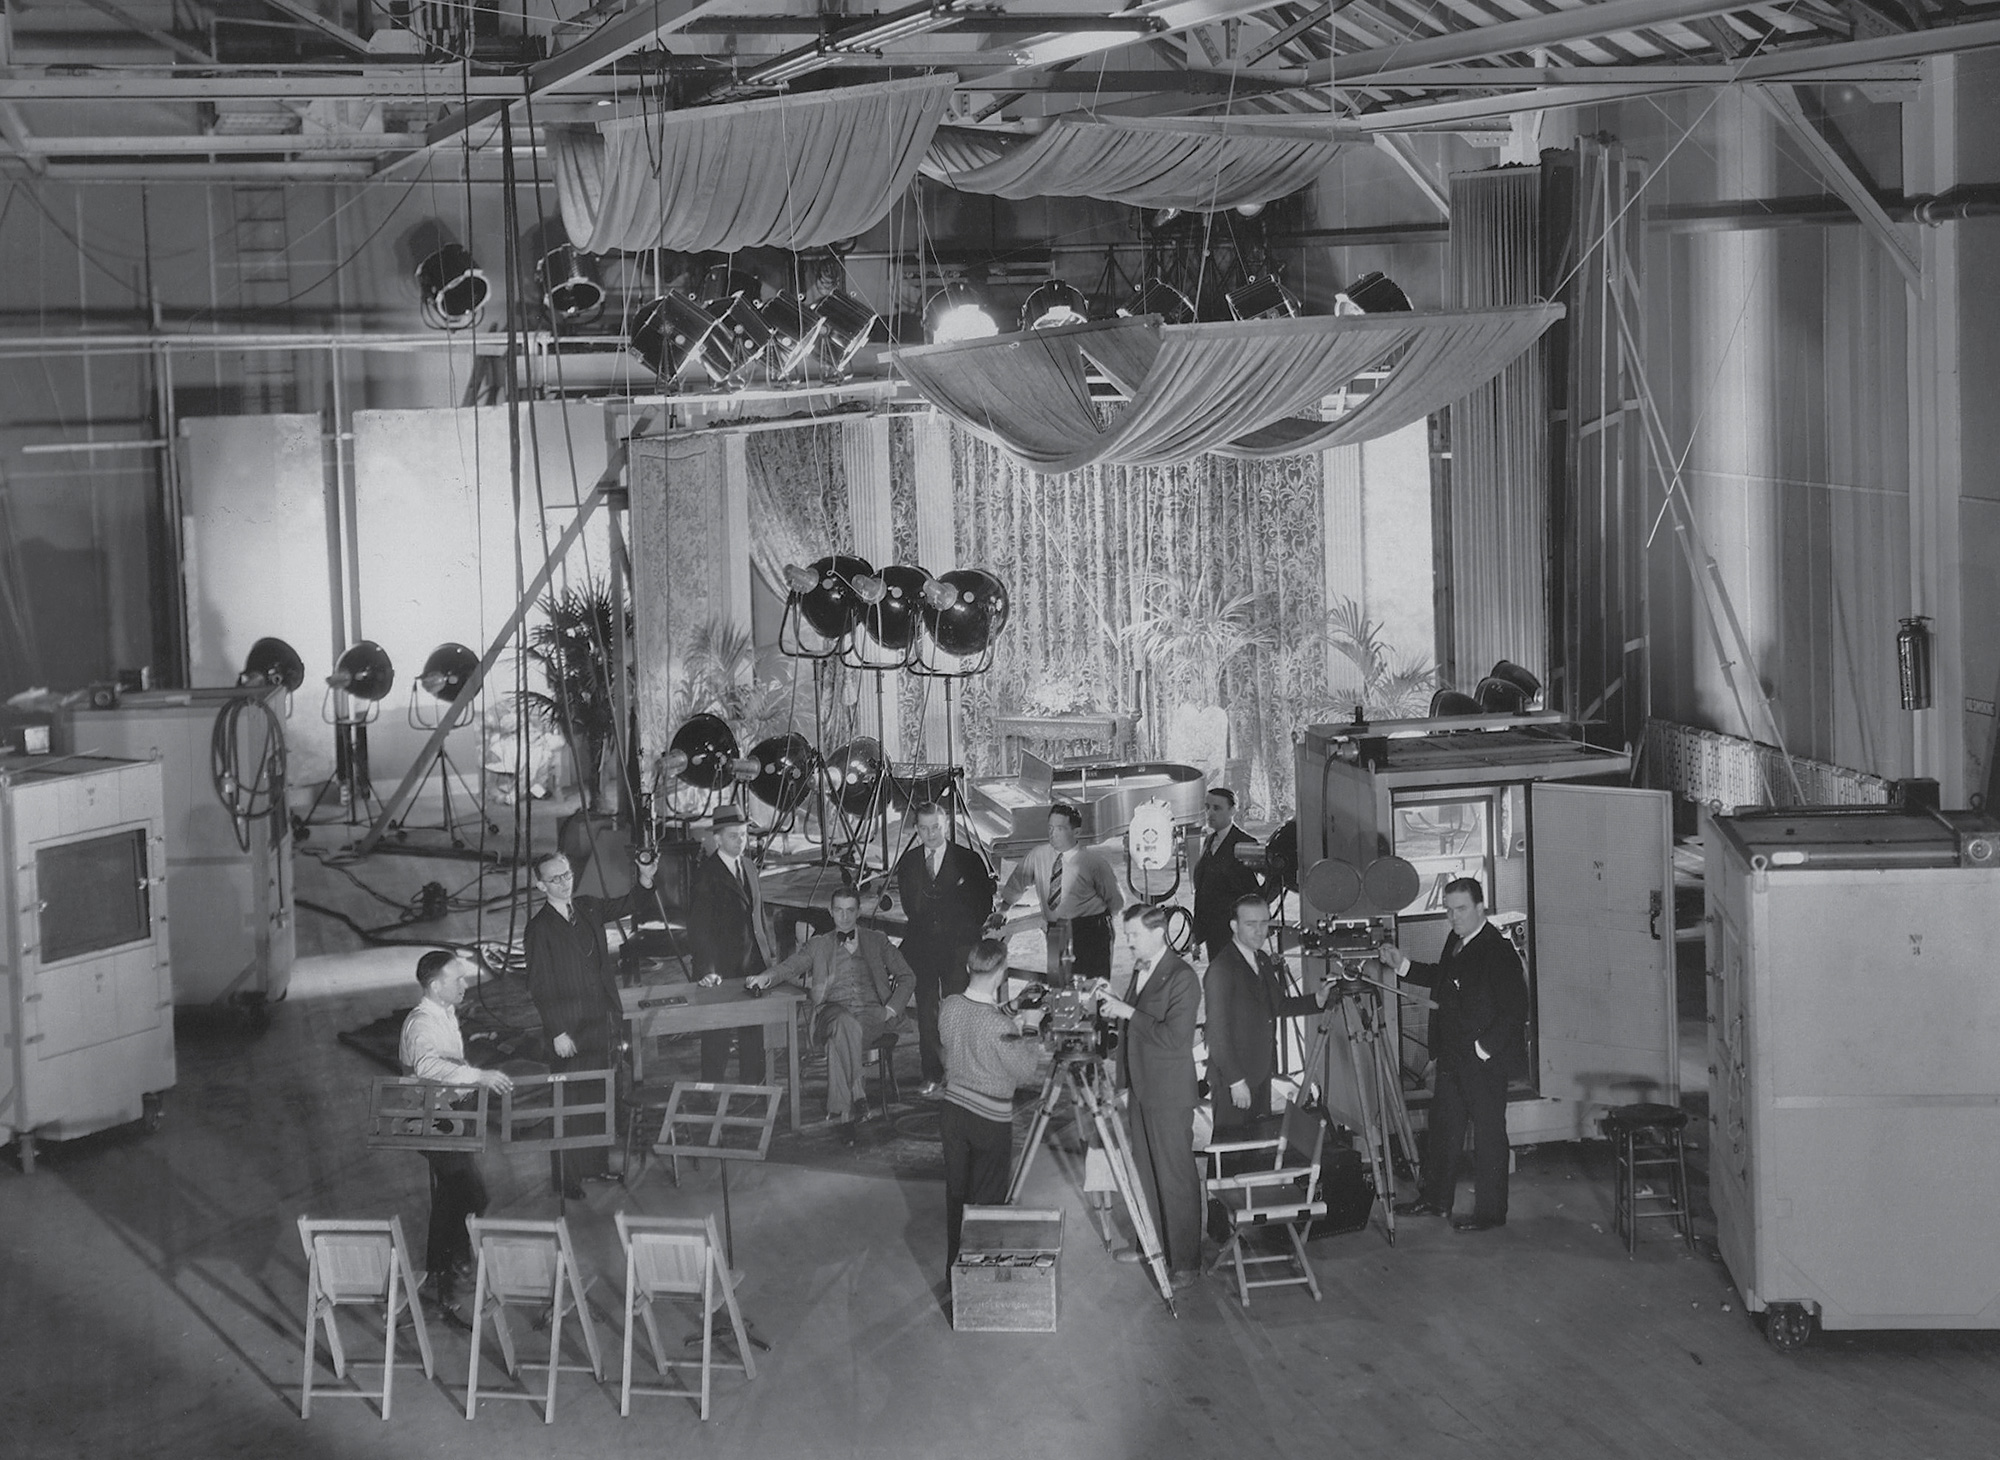 A circa nineteen thirty production shot showing one of the sound stages at Warner Brothers’ Brooklyn studio. The large “cabins”—soundproof booths that housed the cameras—were on rollers and could be moved. Often up to three cameras shot simultaneously from different angles. The Vitaphone sound-on-disc system allowed sounds recorded live during filming to later be merged with additional background music and sound effects onto one new composite disk that was played in the cinema during screenings.